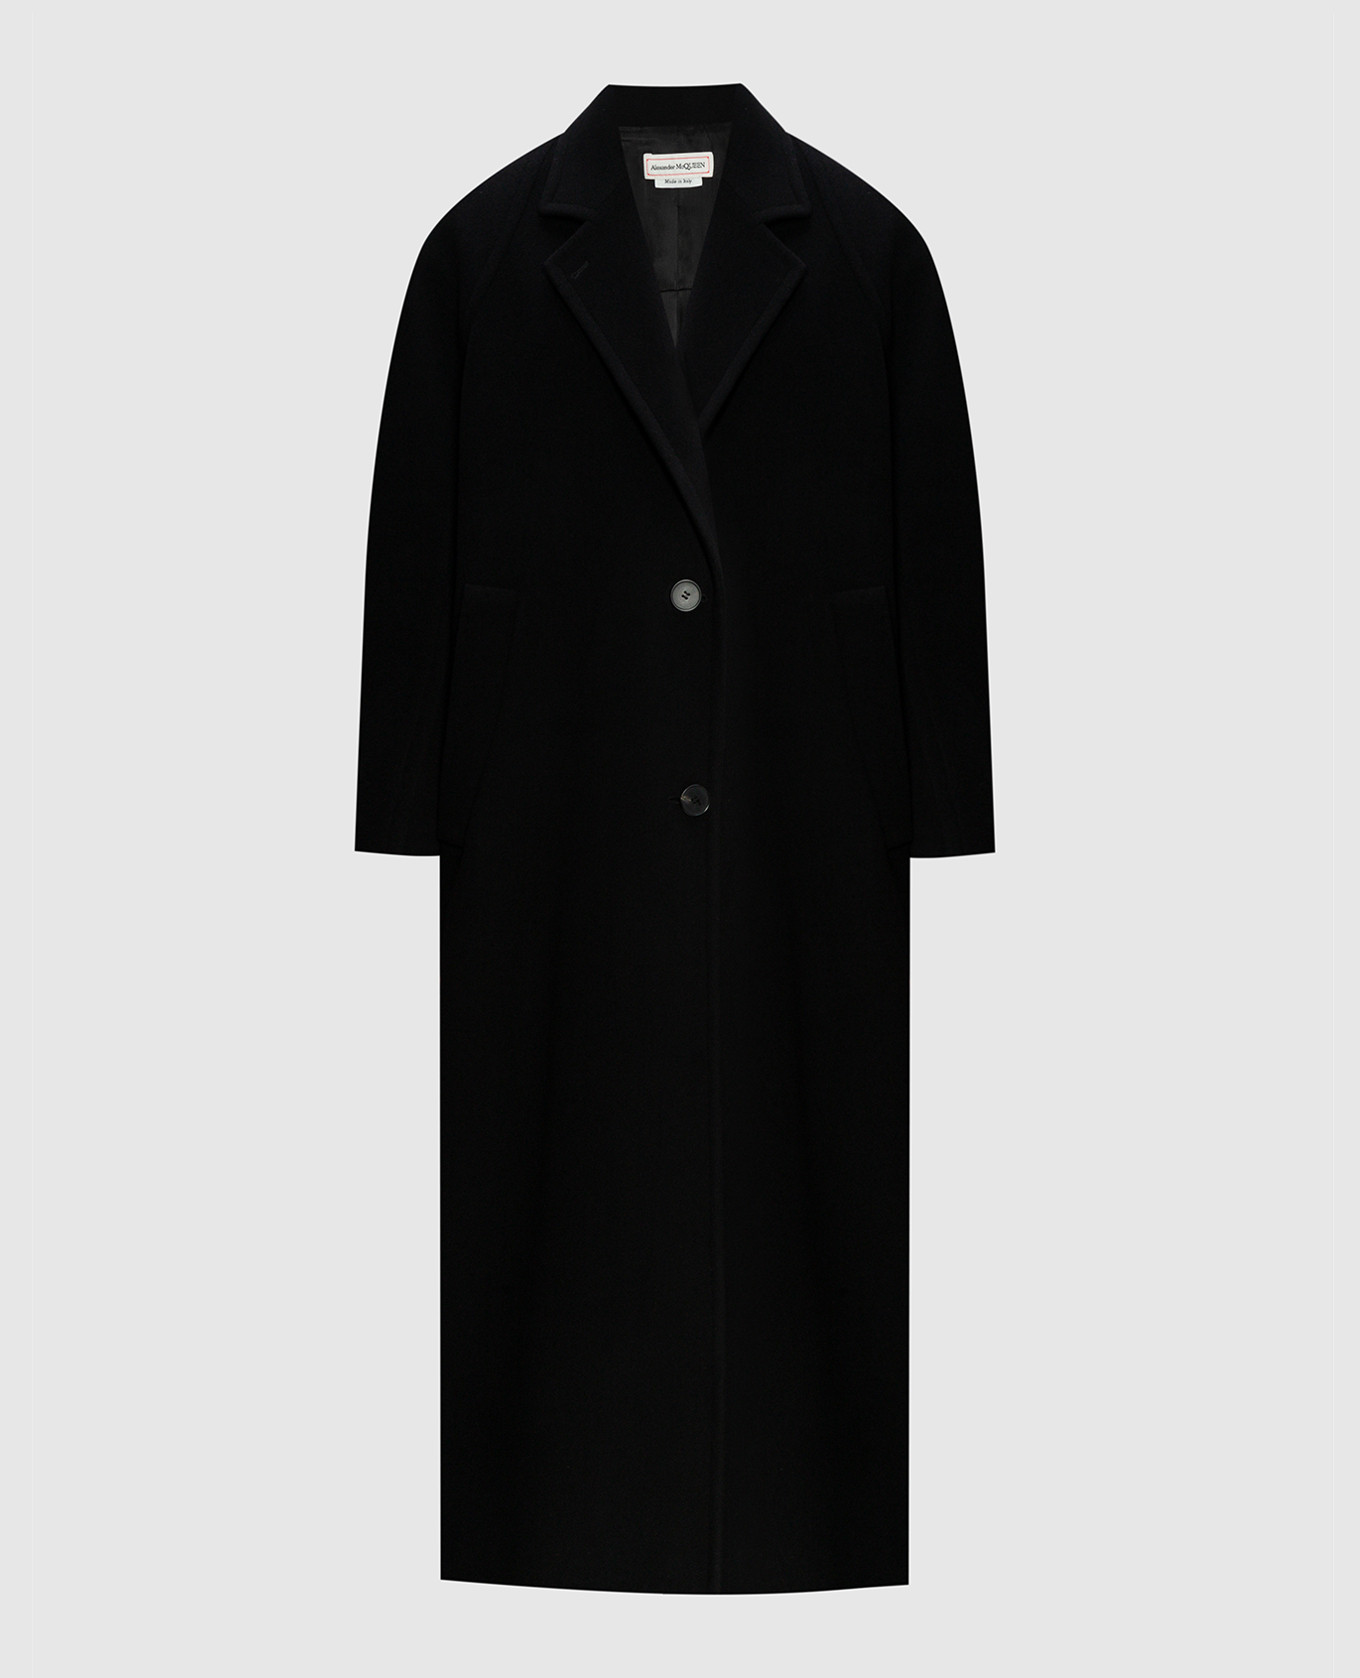 Black wool and cashmere coat with a free cut